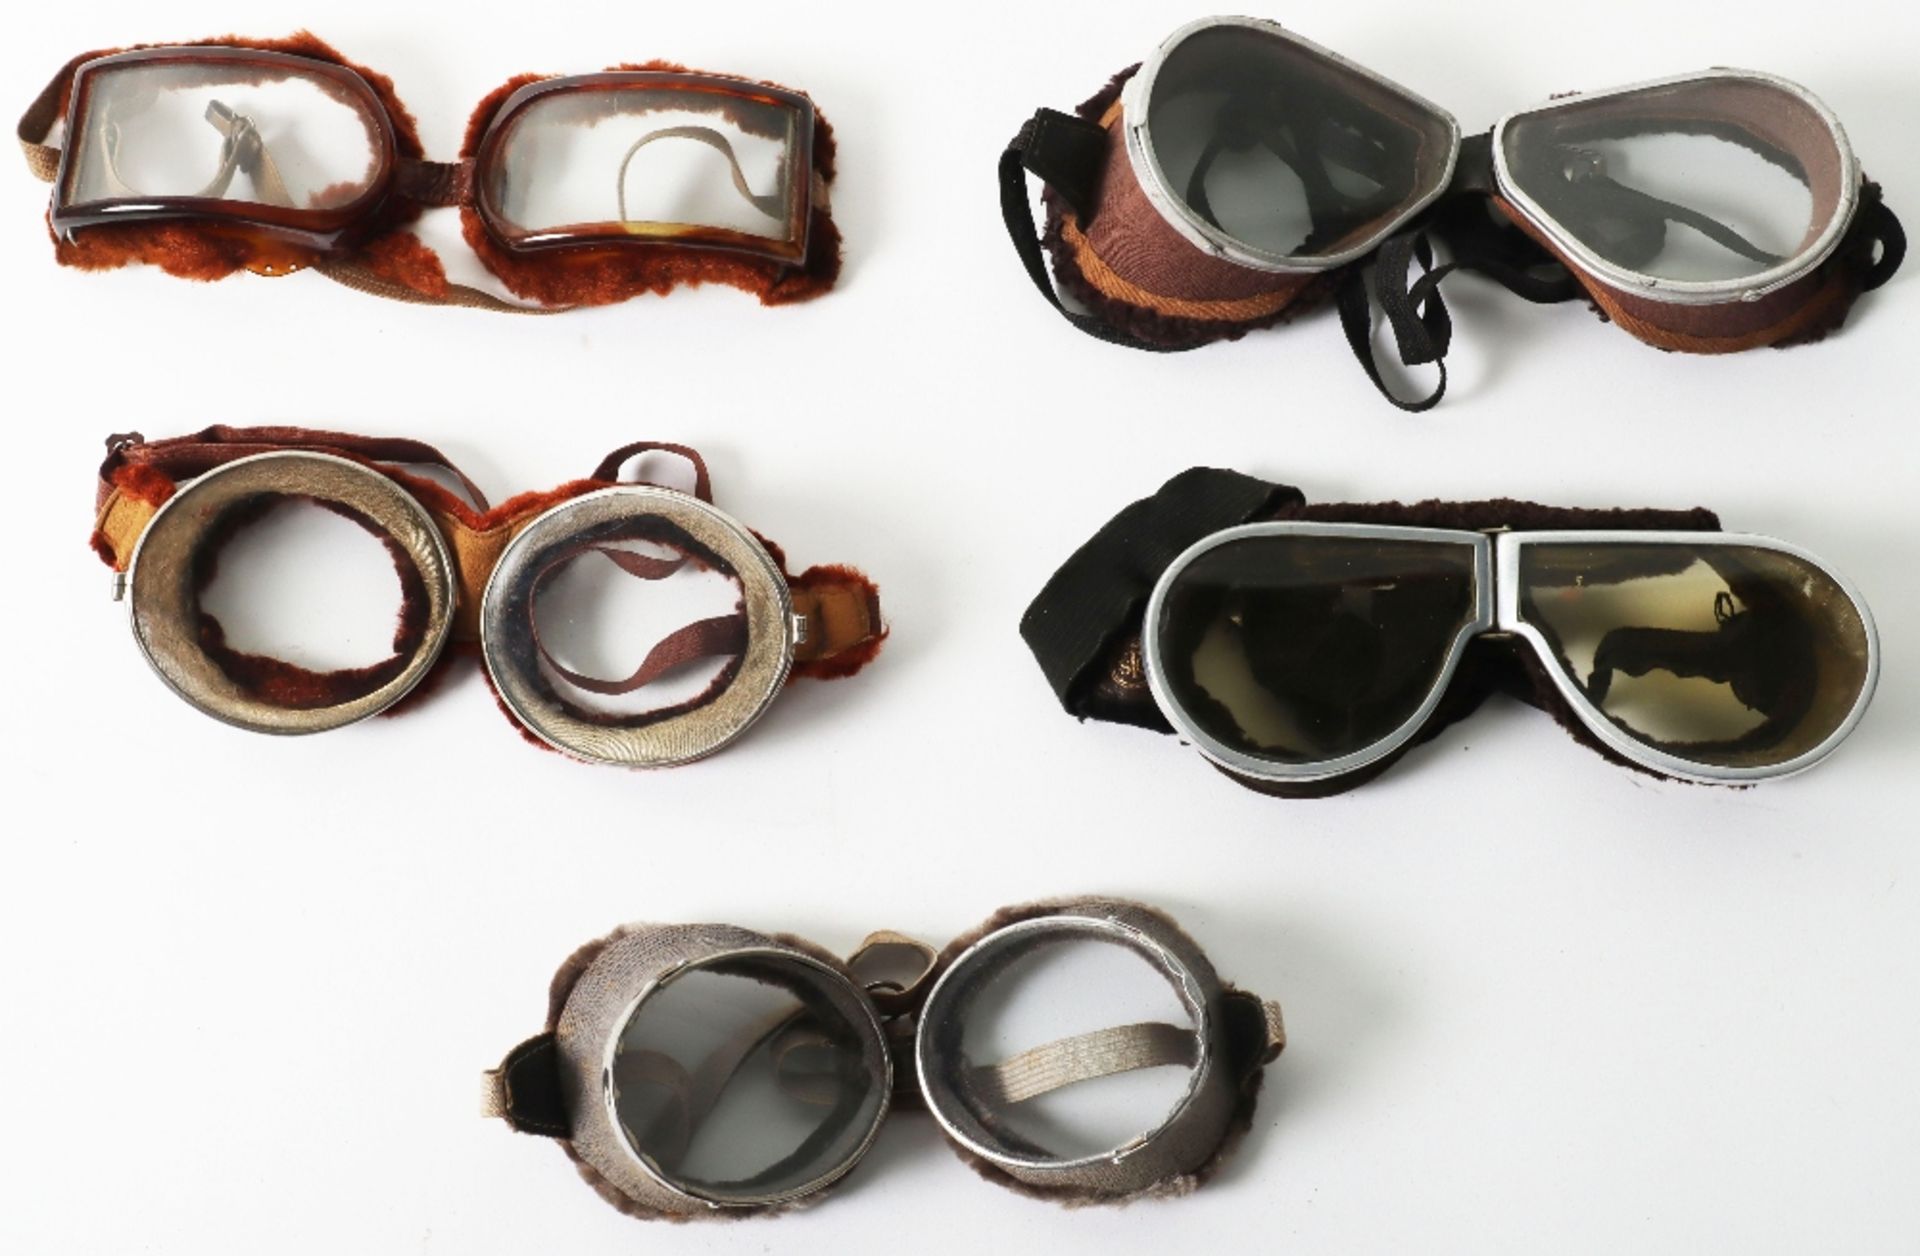 Five Pairs of Aviators Flying Goggles